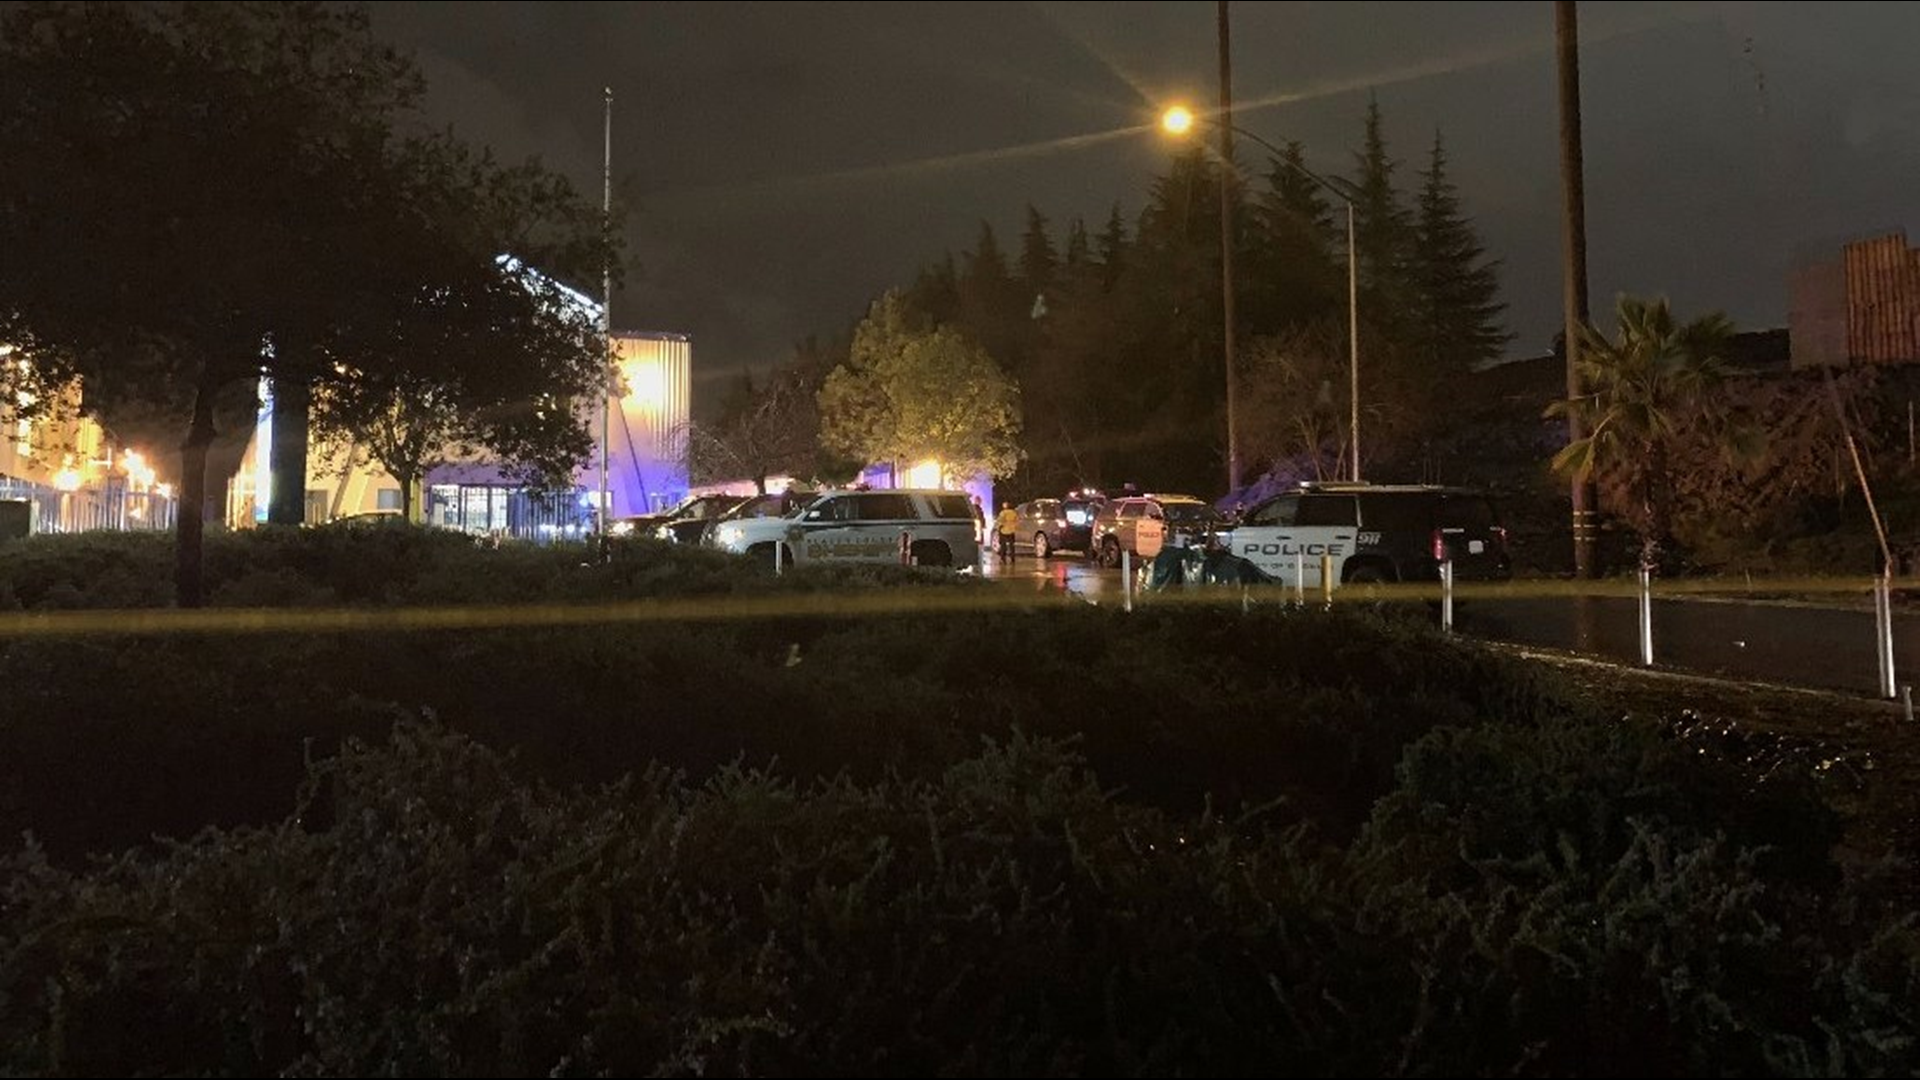 As deputies moved in to make the arrest, shots were fired and both the suspect and a K9 officer were hit. Around 10:45 p.m., Roseville Police reported that the suspect had died from his injuries.